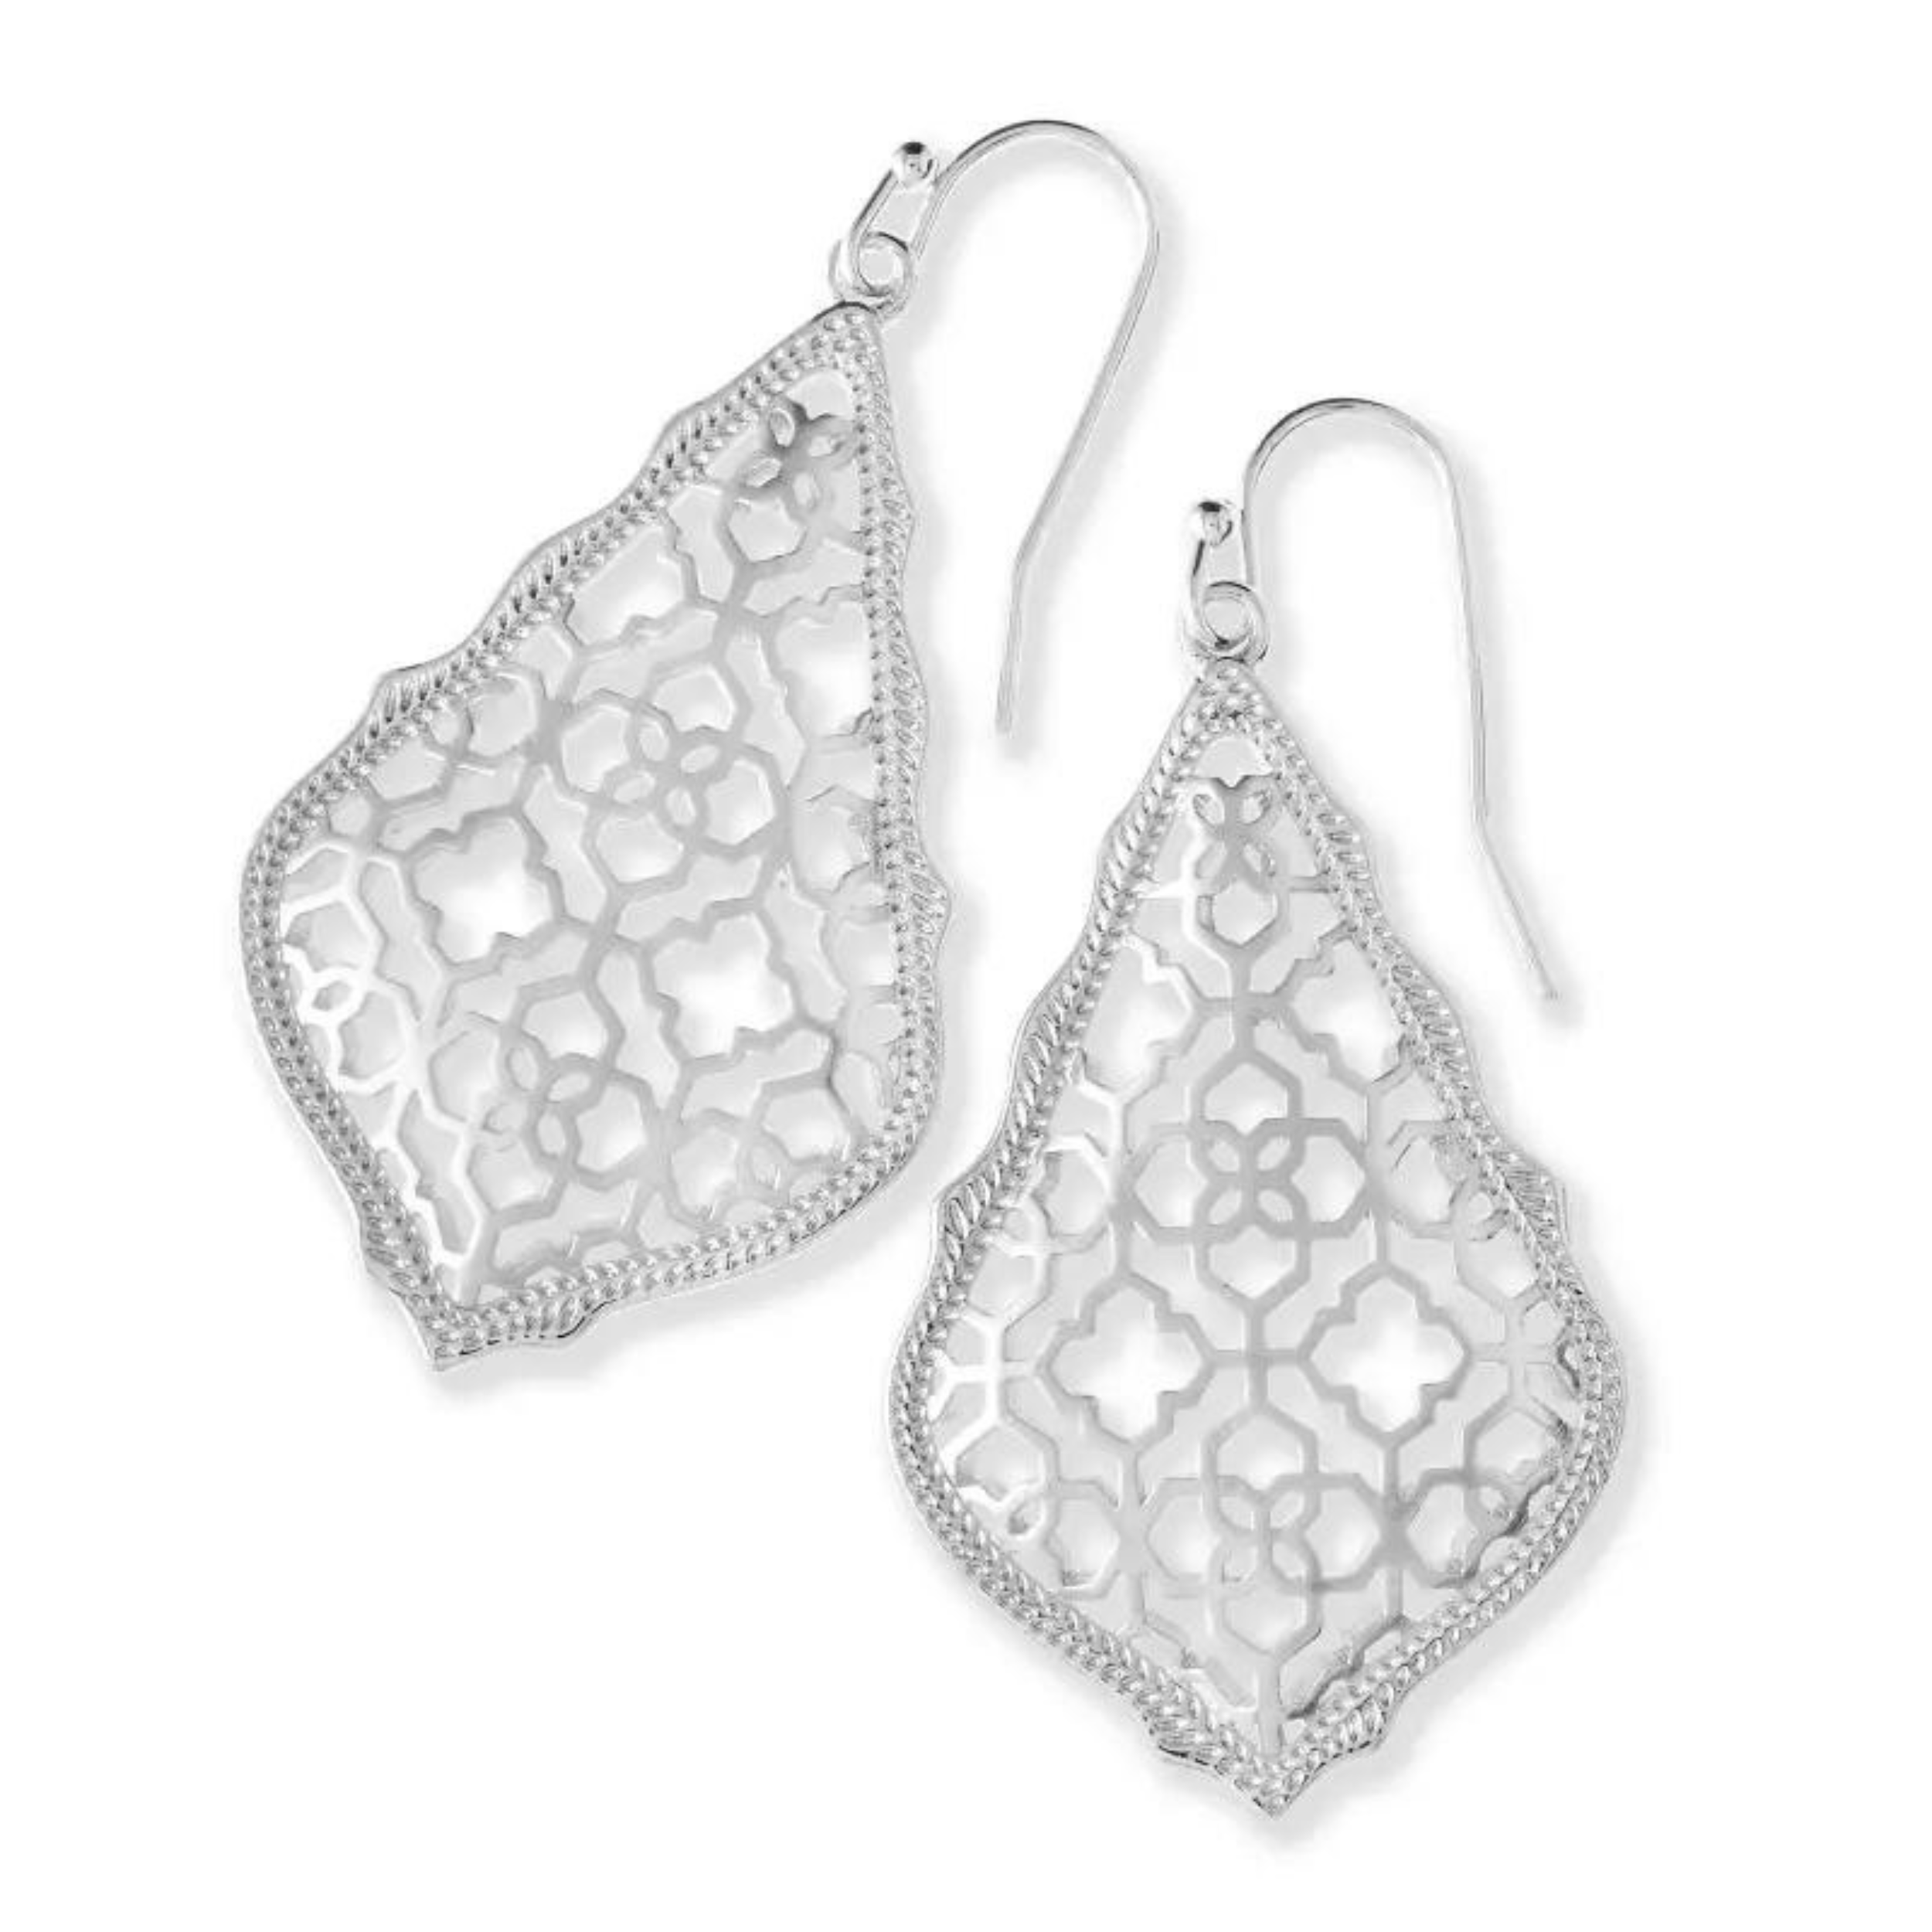 Silver dangle earrings pictured on a white background.